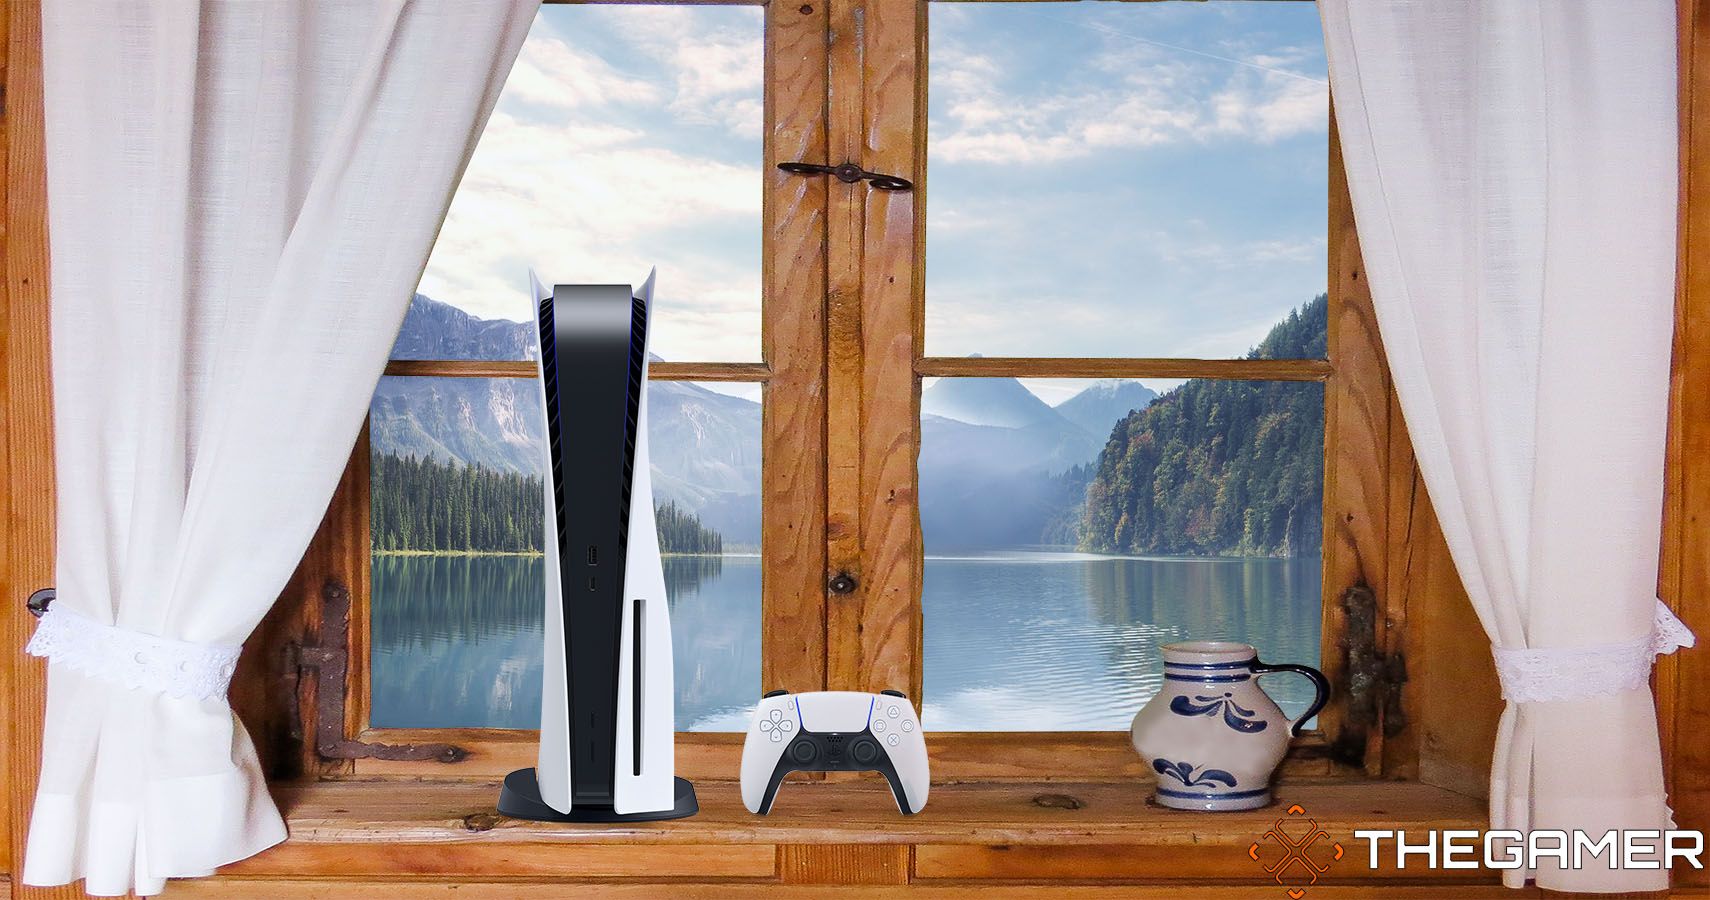 PS5 and Dualsense controller on top of stock image of mountain lake by Yuri B and stock image of window, both from Pixabay